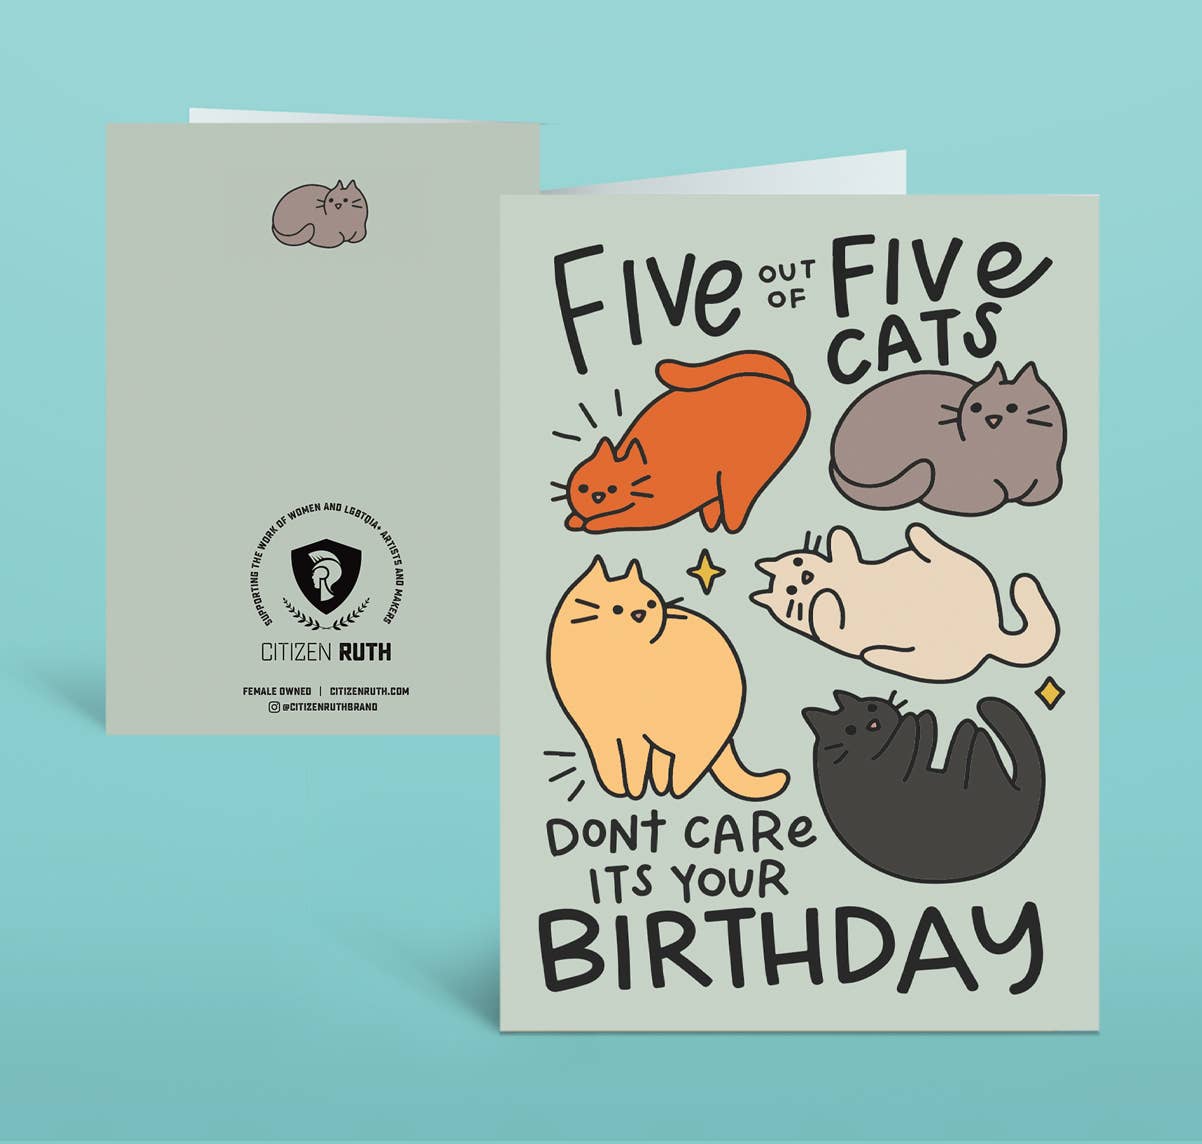 5 out of 5 Cats Birthday Card